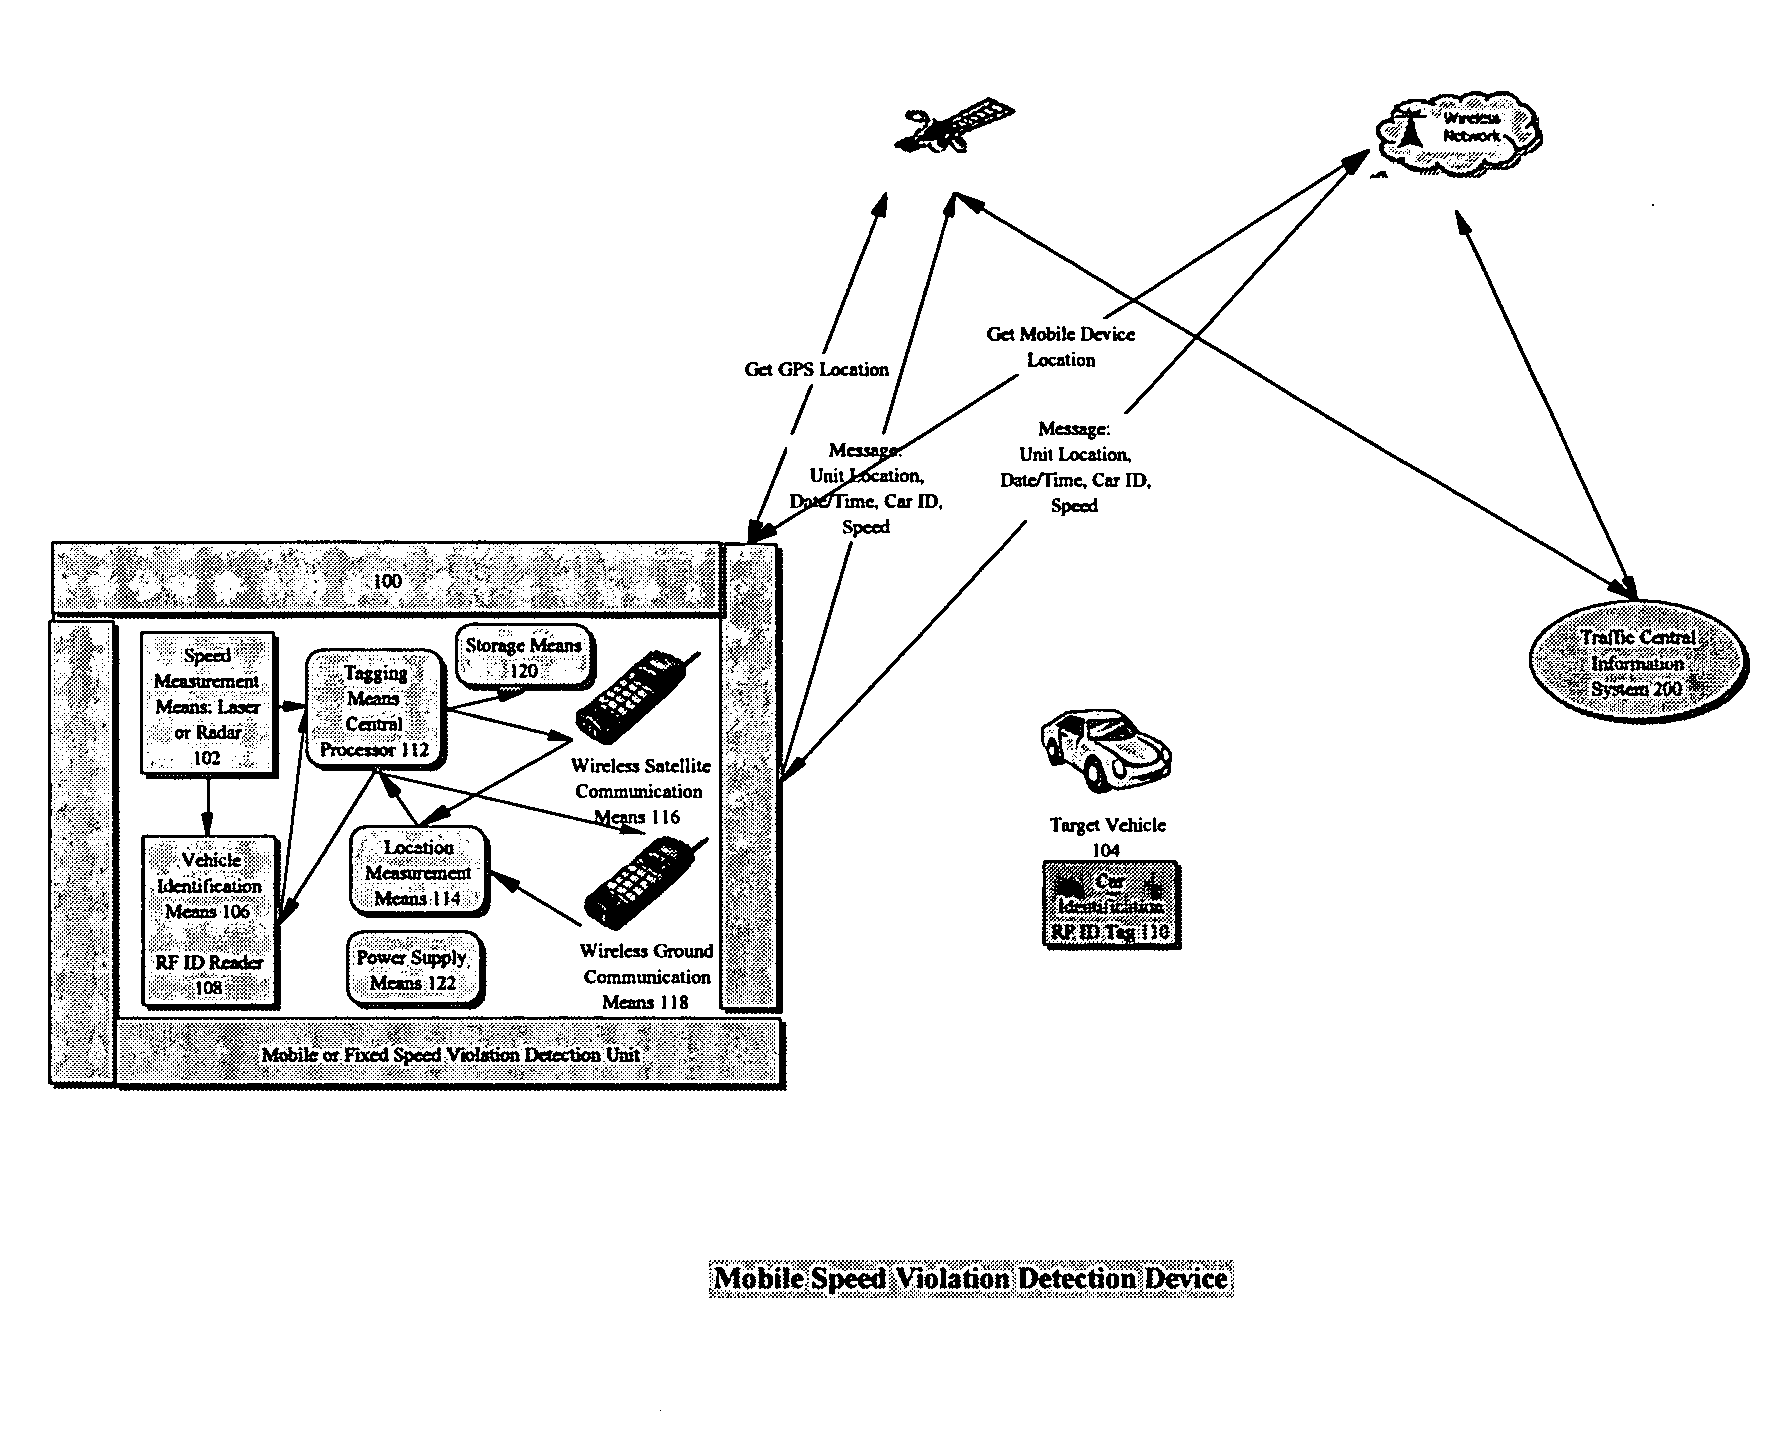 Automatic speed violation detection and response system using wireless communication, positioning and RF ID